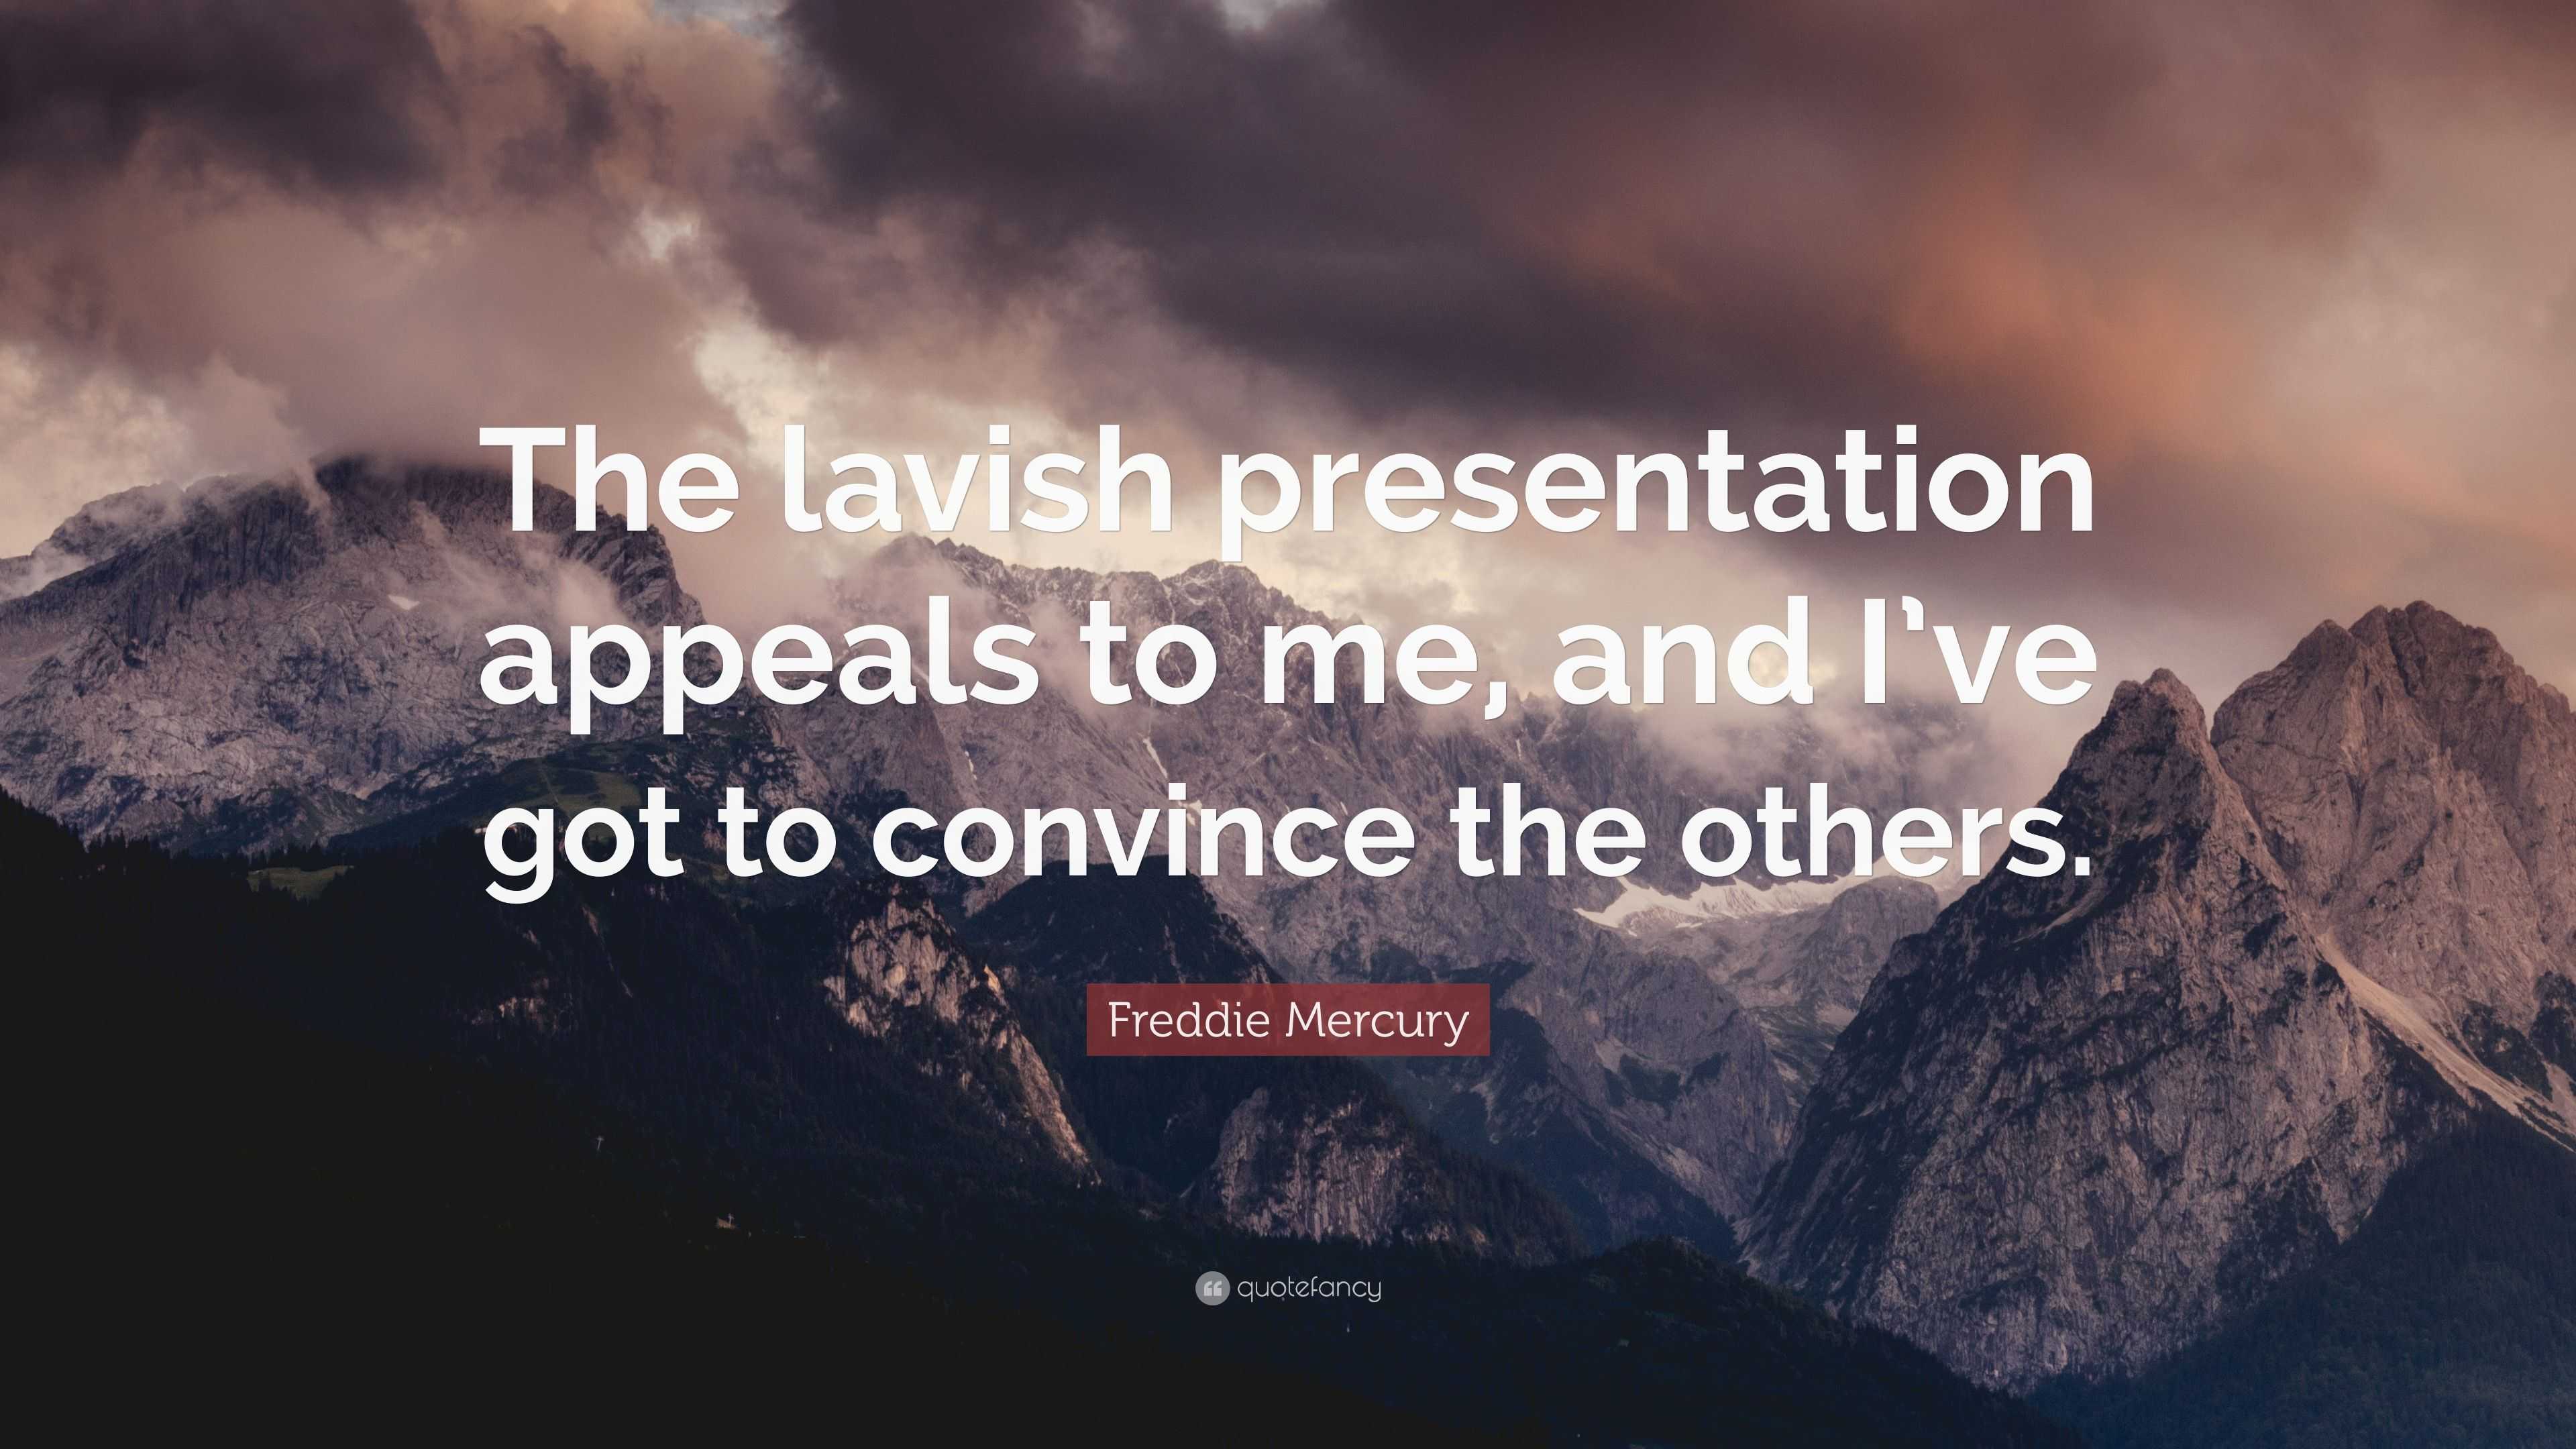 Freddie Mercury Quote “The lavish presentation appeals to me, and ...